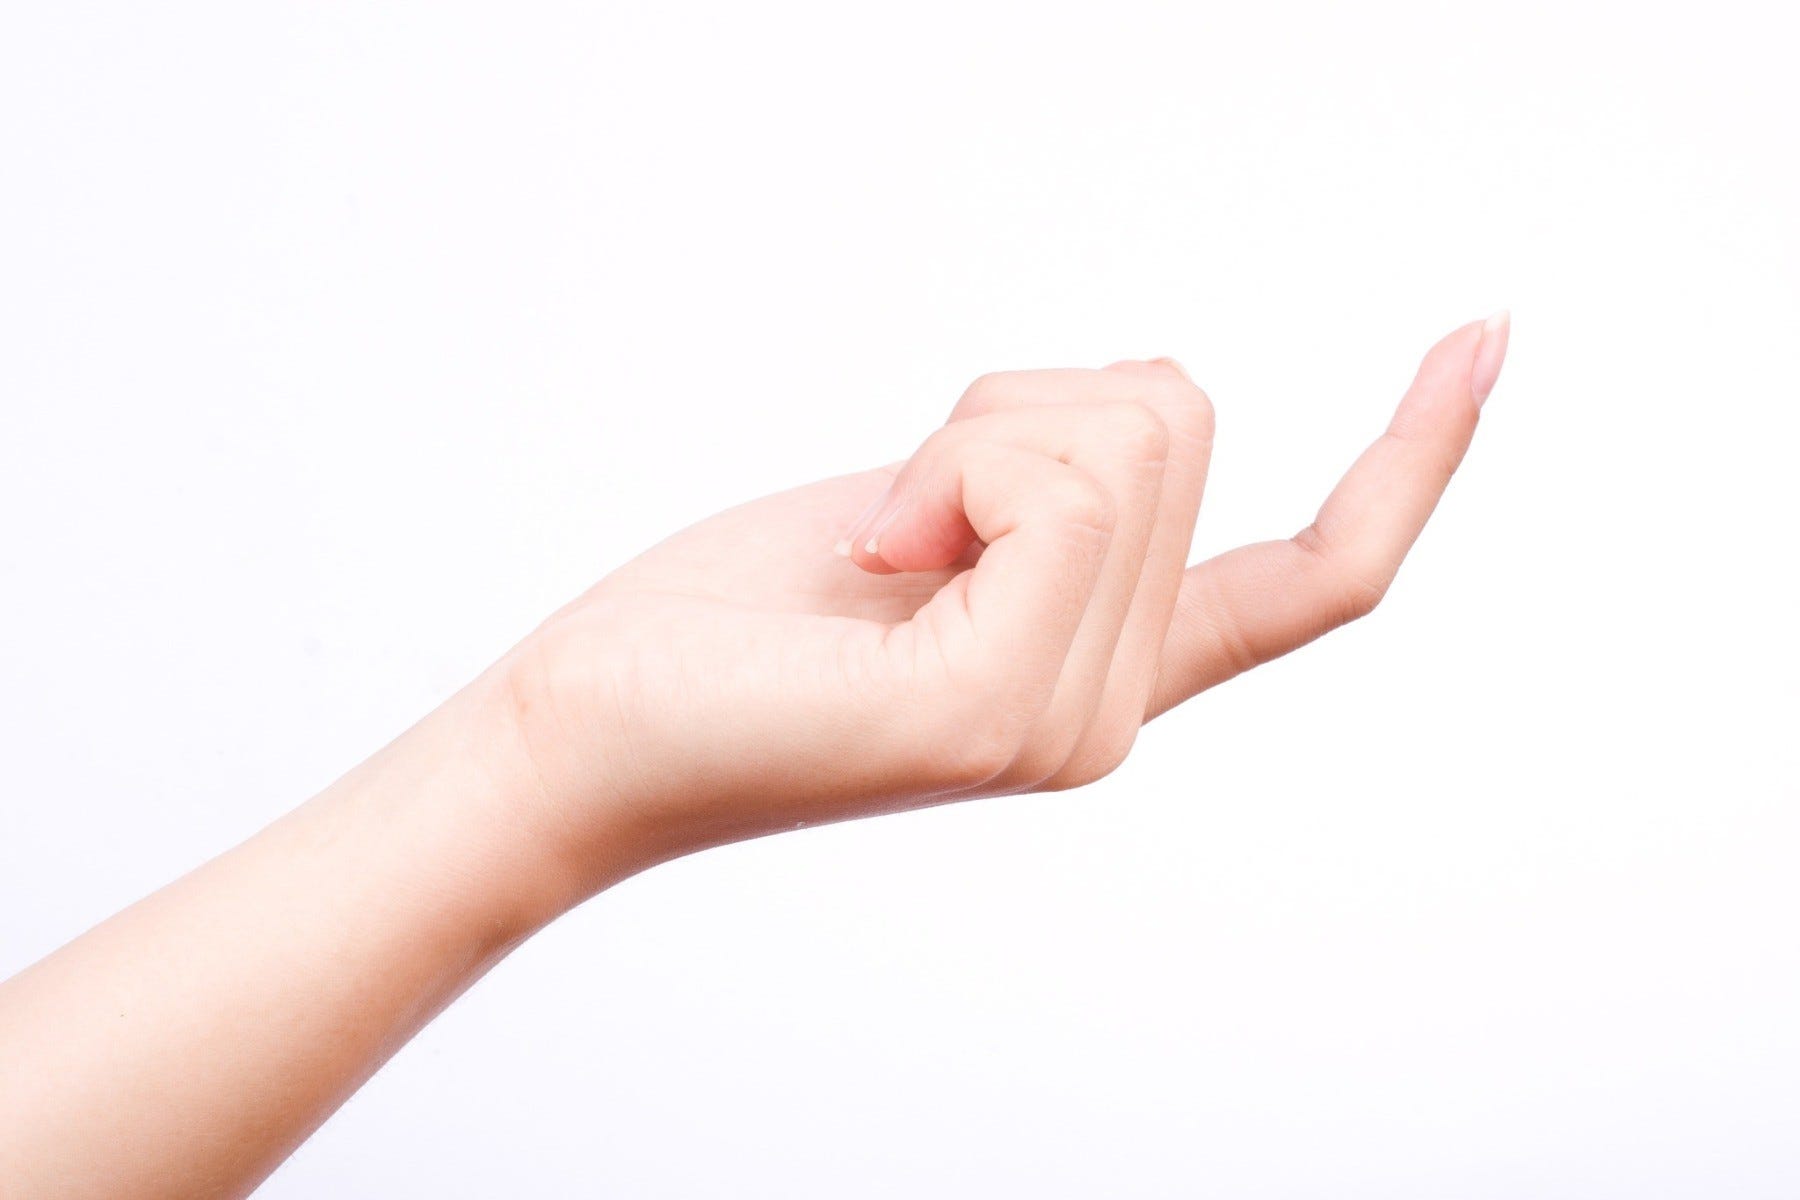 A woman's hand making a "come here" motion with her index finger.